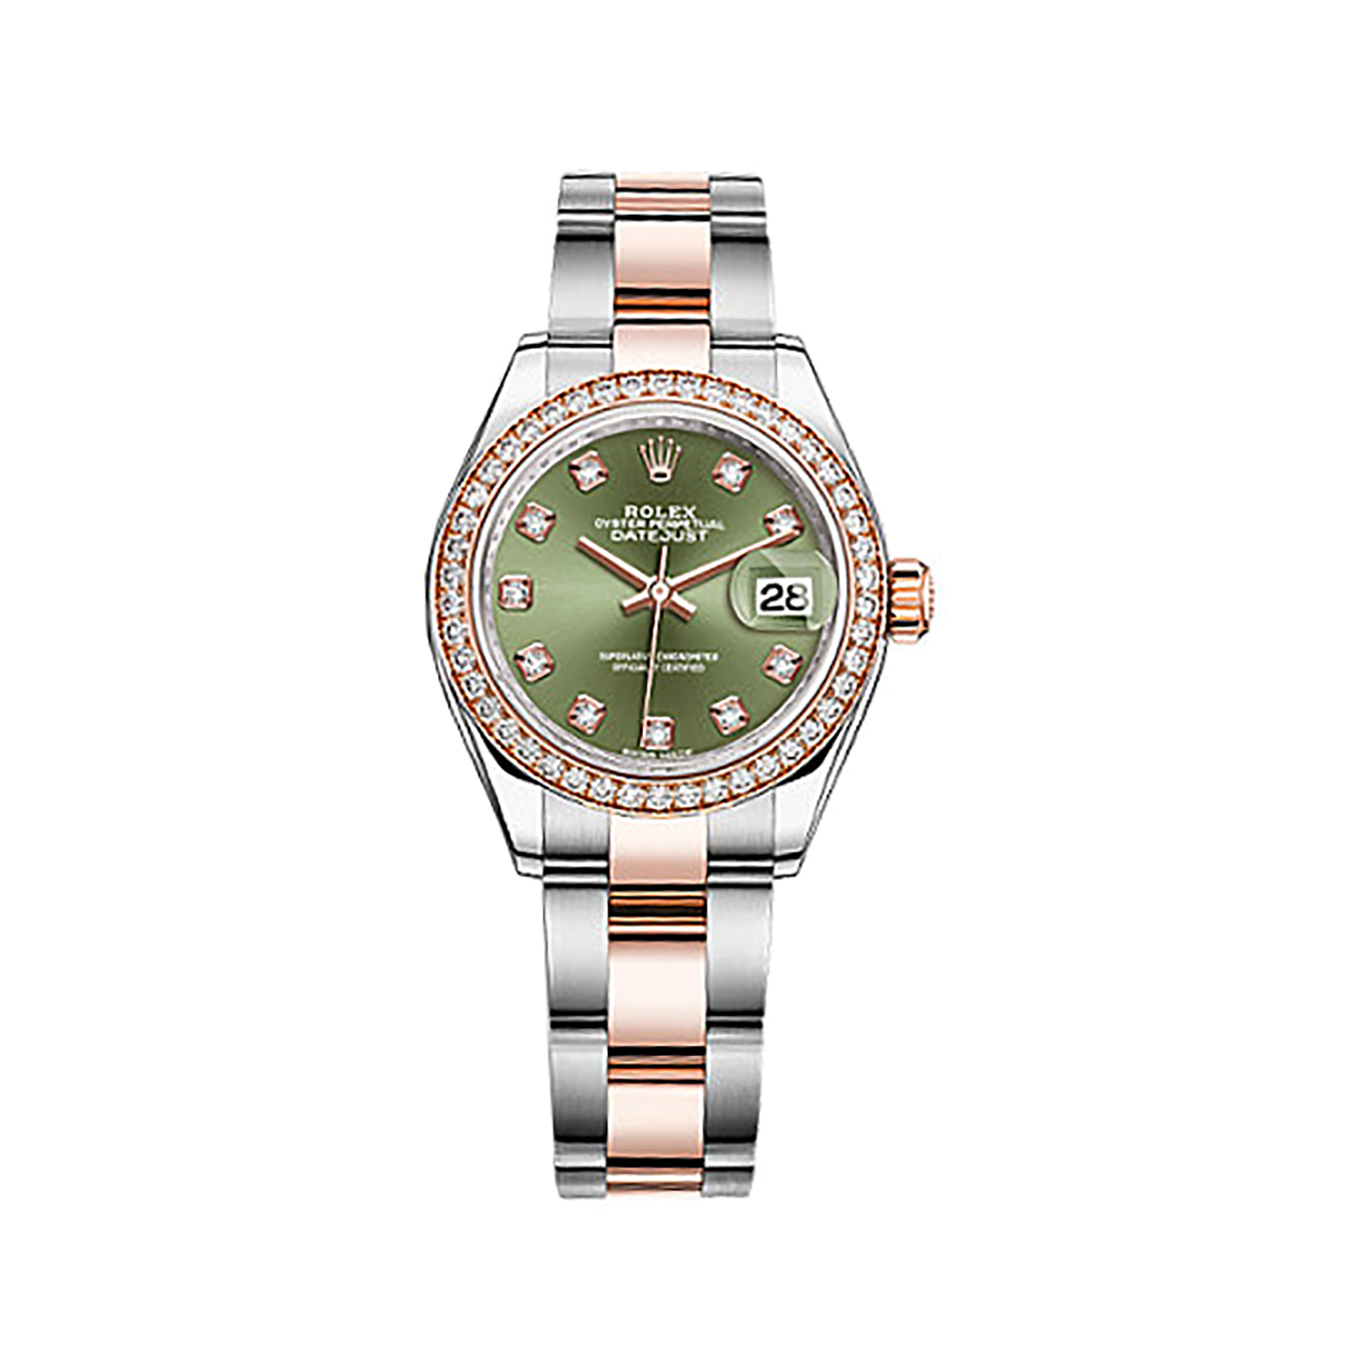 Lady-Datejust 28 279381RBR Rose Gold & Stainless Steel & Diamonds Watch (Olive Green Set with Diamonds)